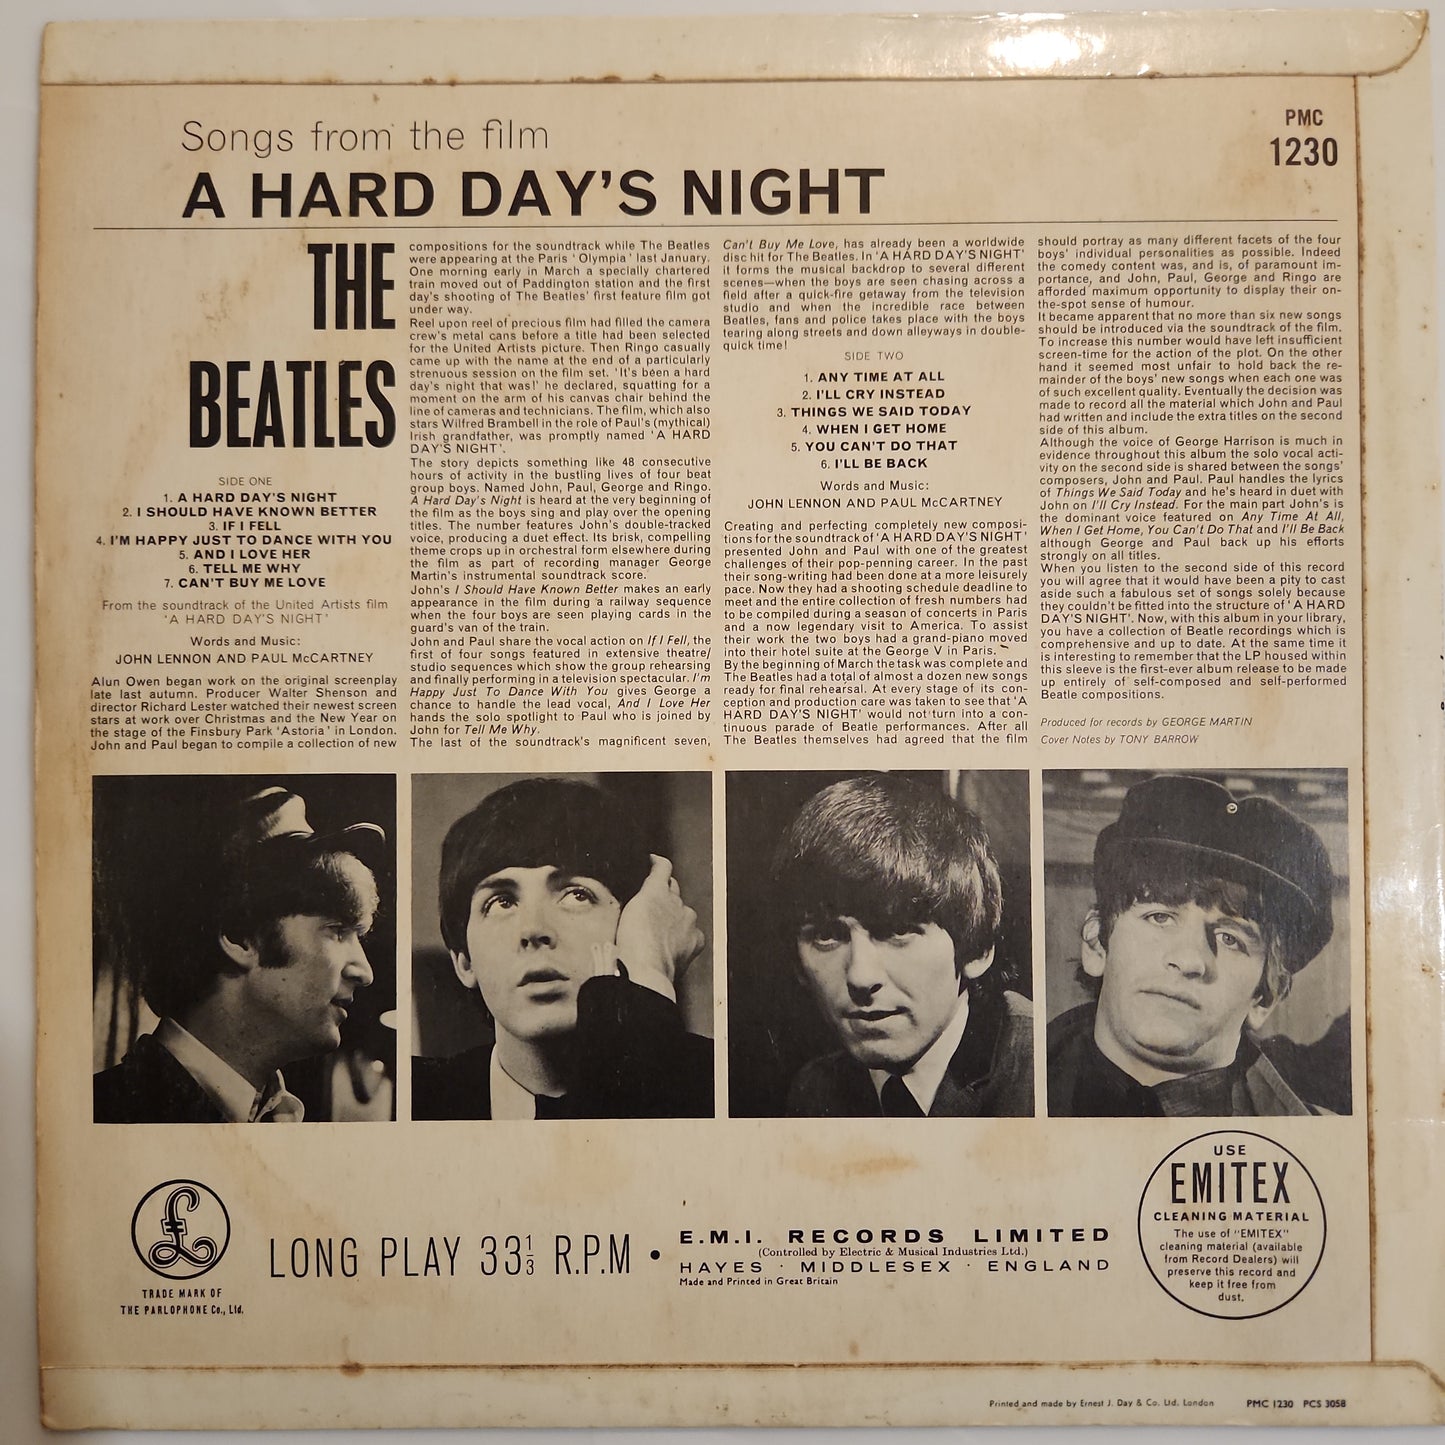 The Beatles - A Hard Day's Night (F22)